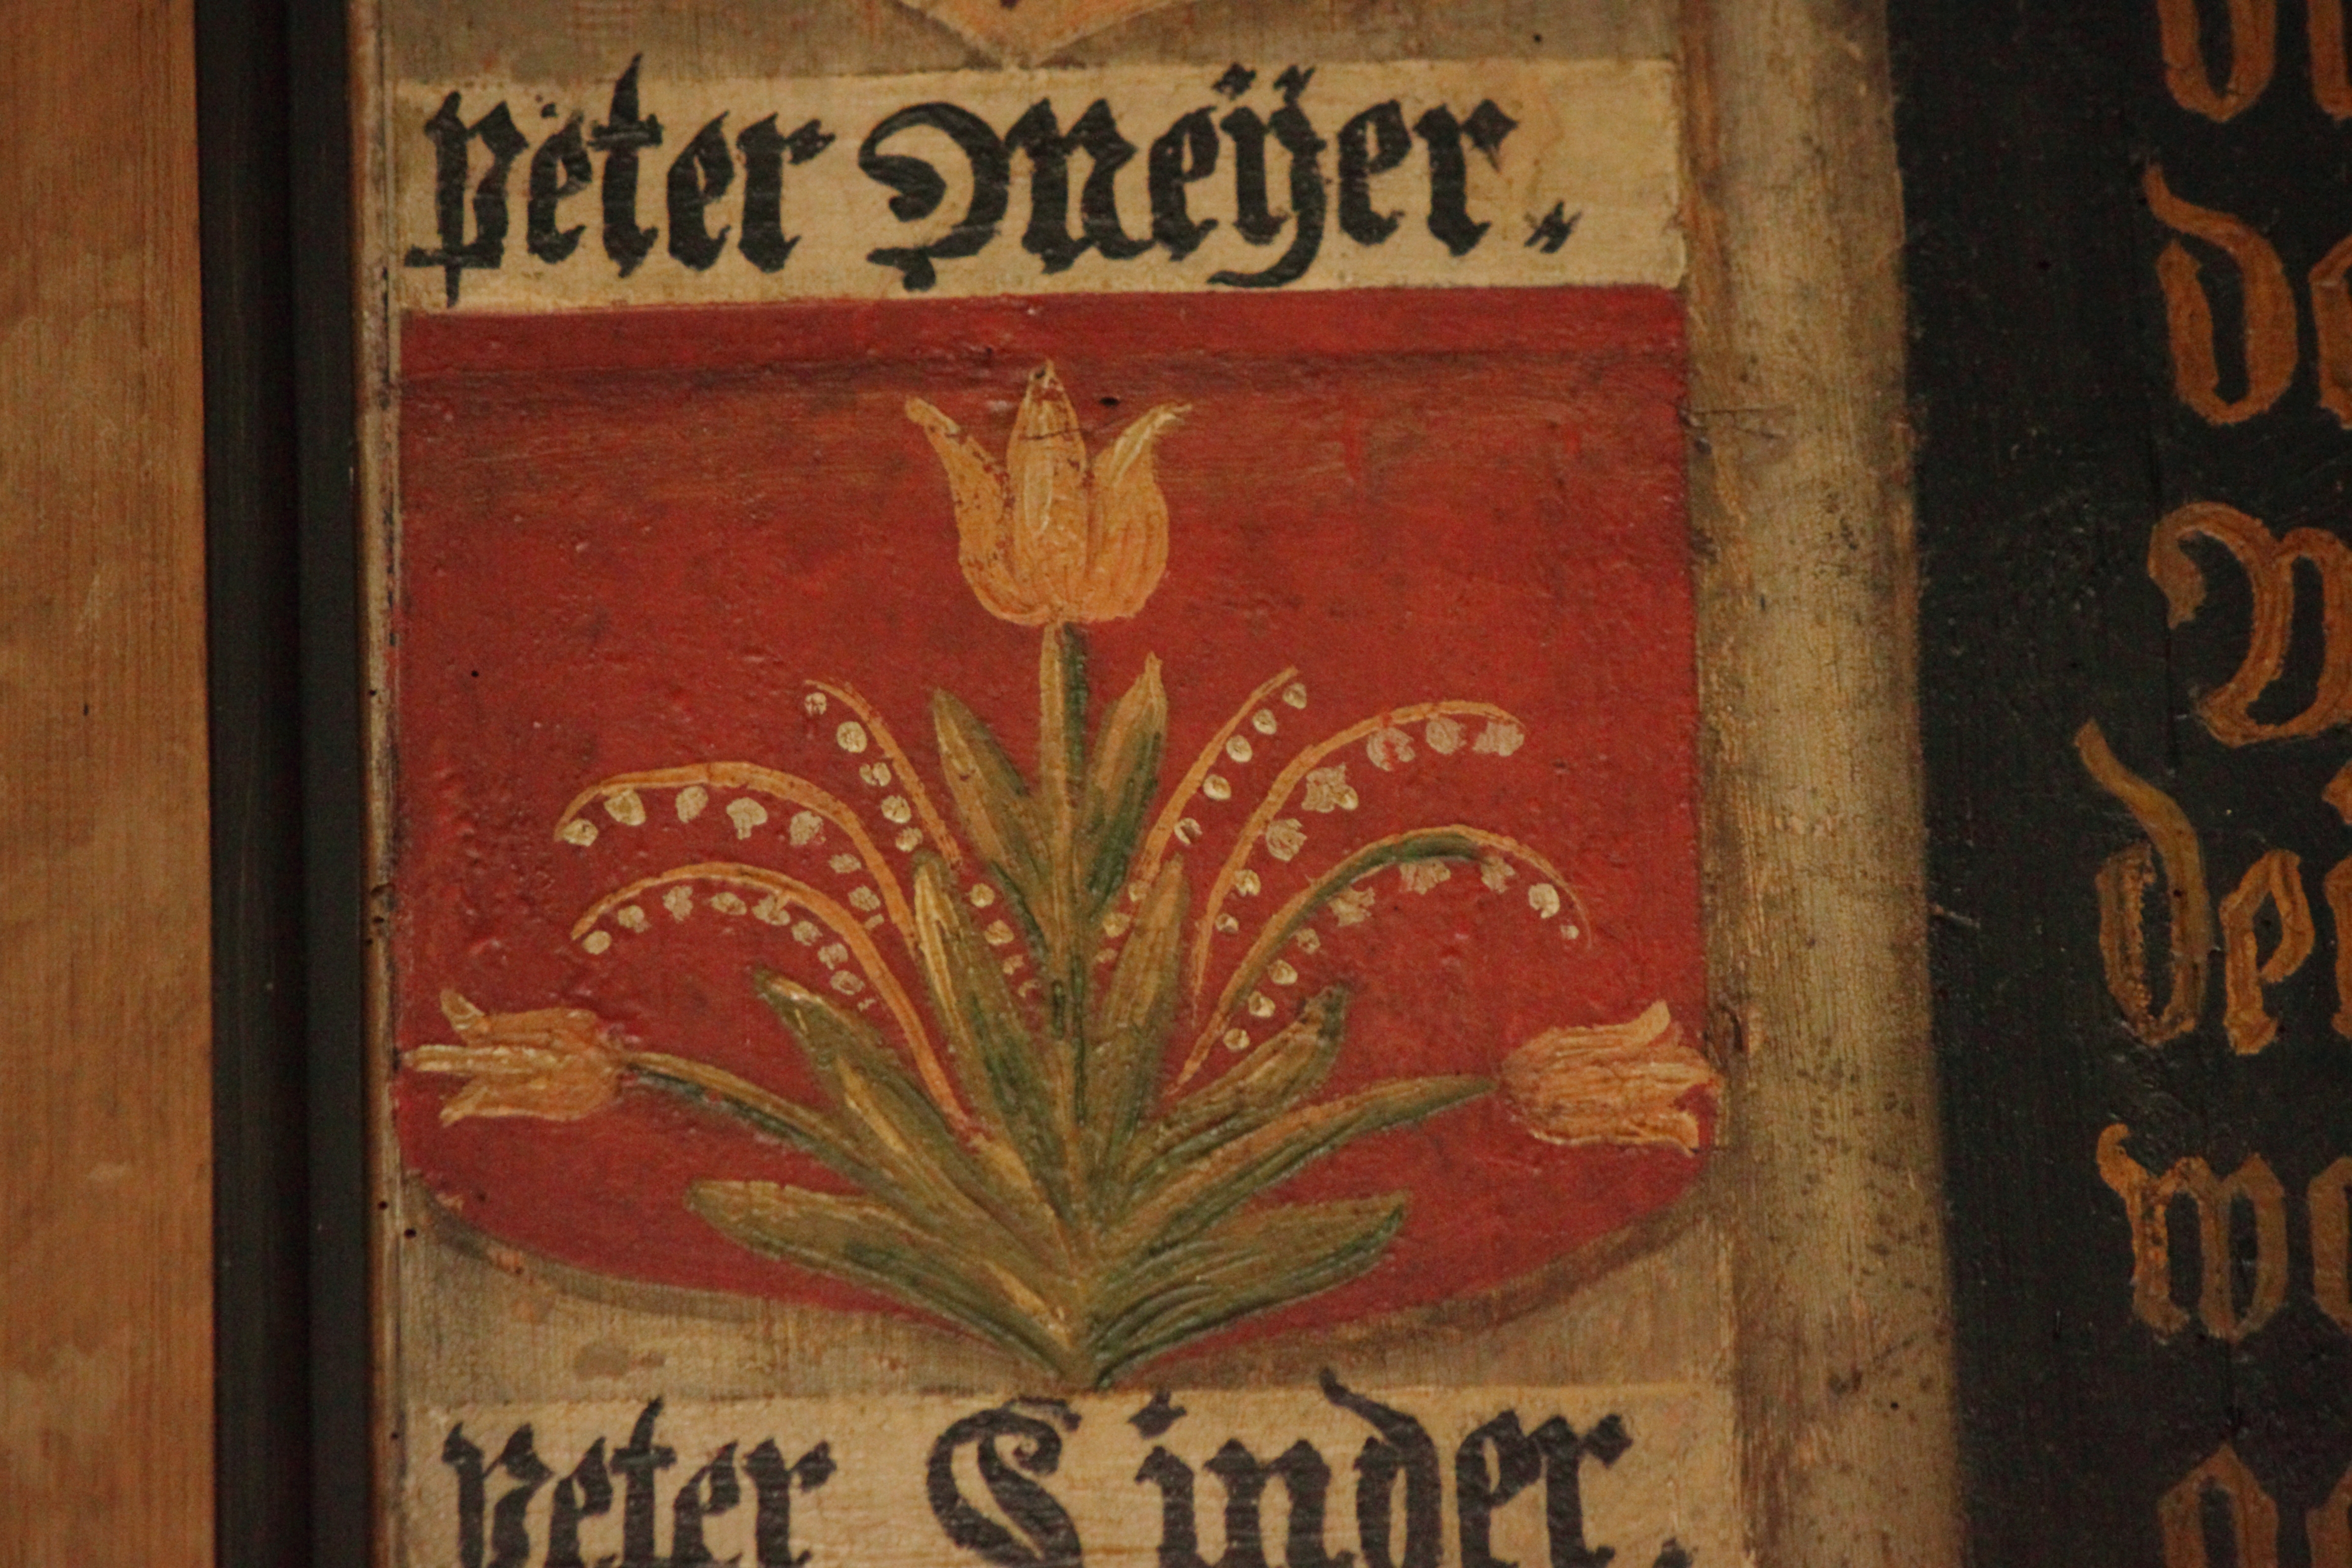 Meyer coat of arms with flowers on a red background